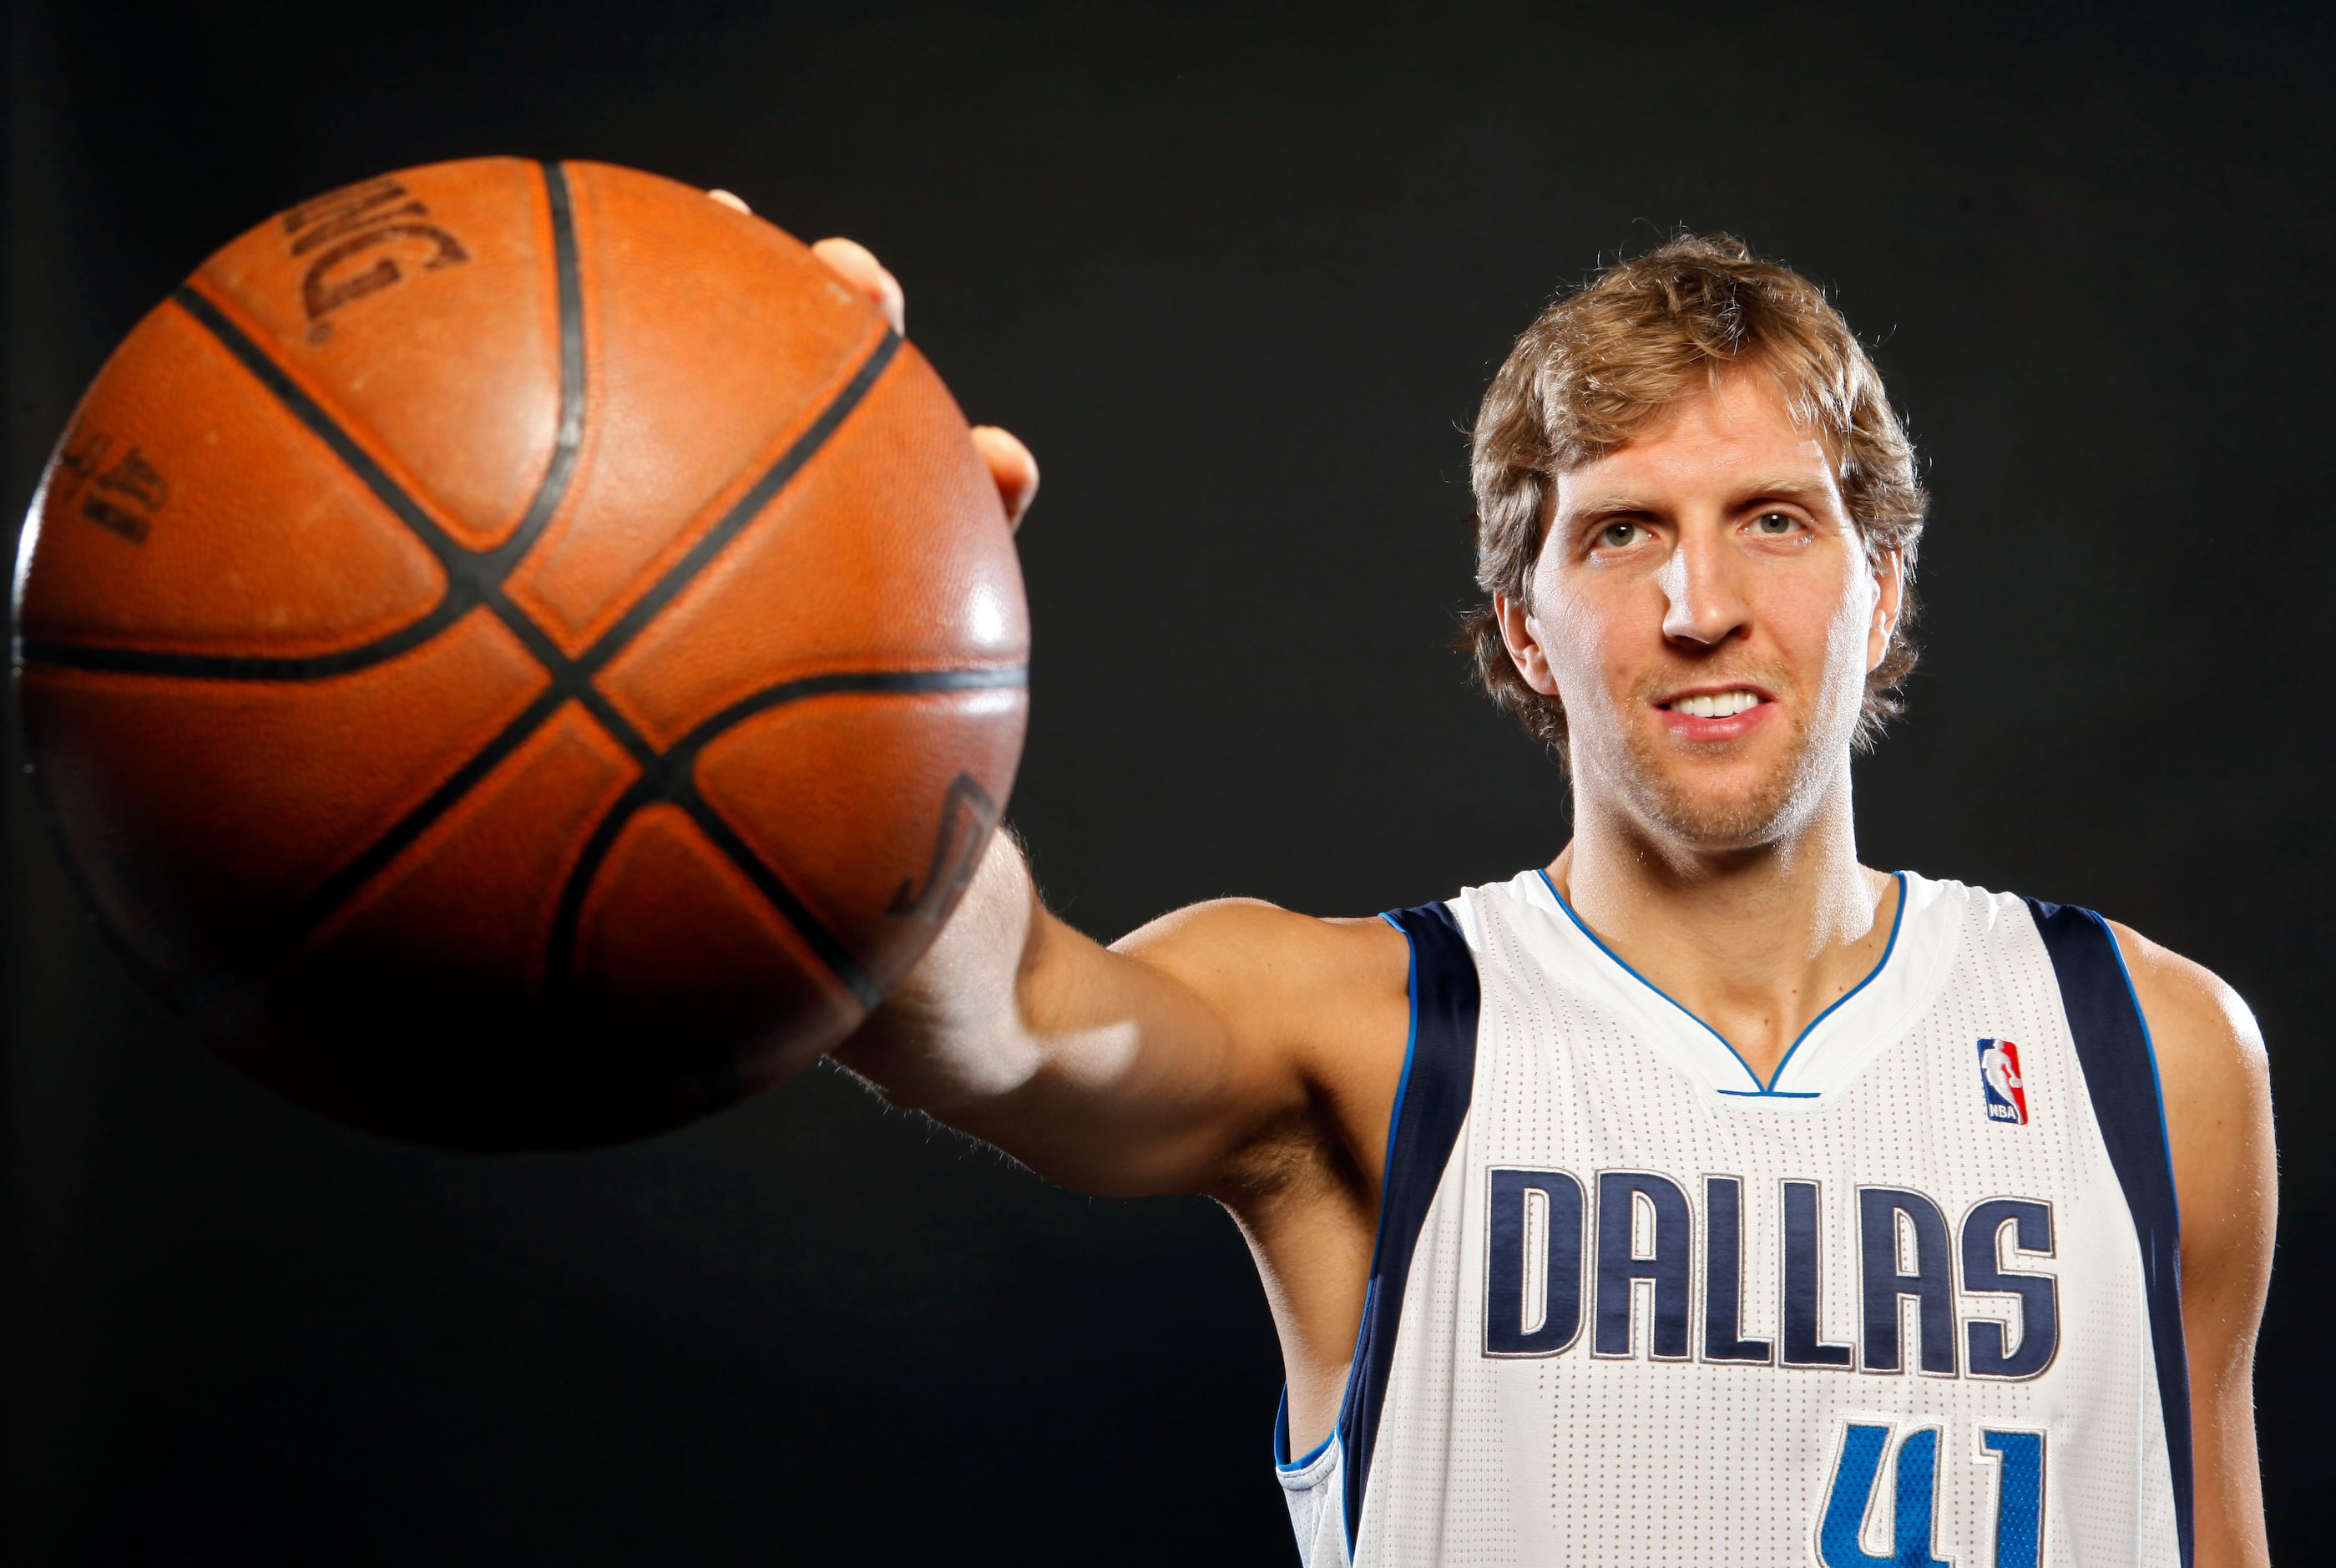 People's champ: Nowitzki lifted a team and city on his shoulders